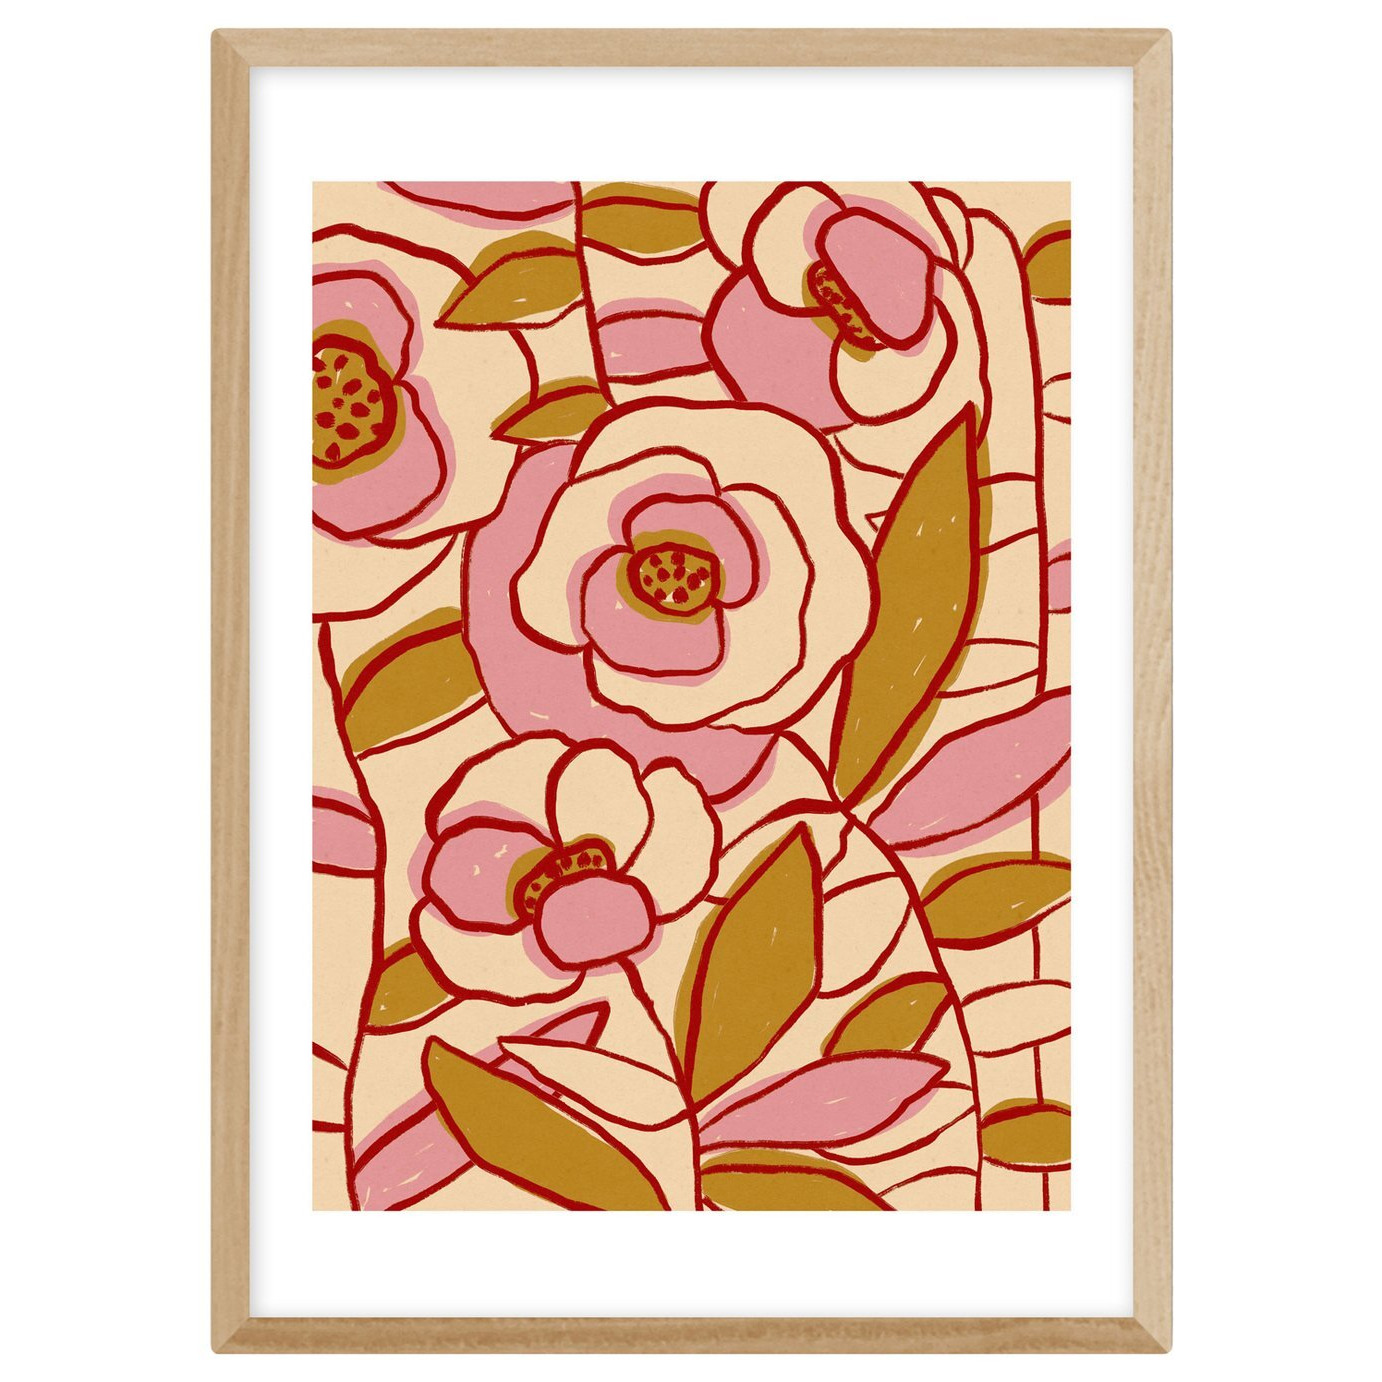 East End Prints Floral Framed Wall Print - A2 - image 1